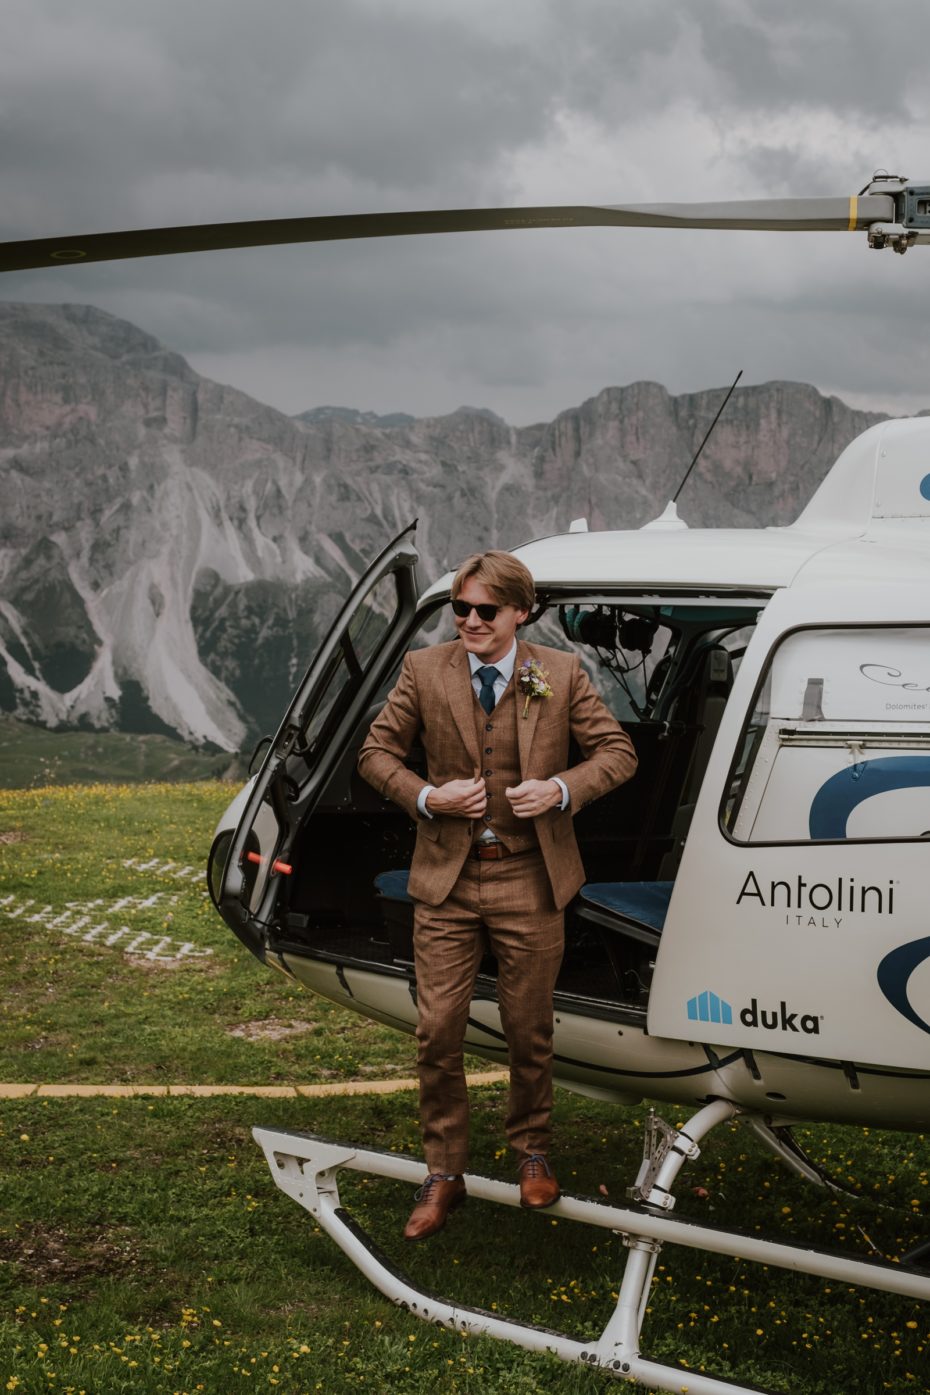 Groom arrives at the wedding ceremony in the Dolomites by helicopter